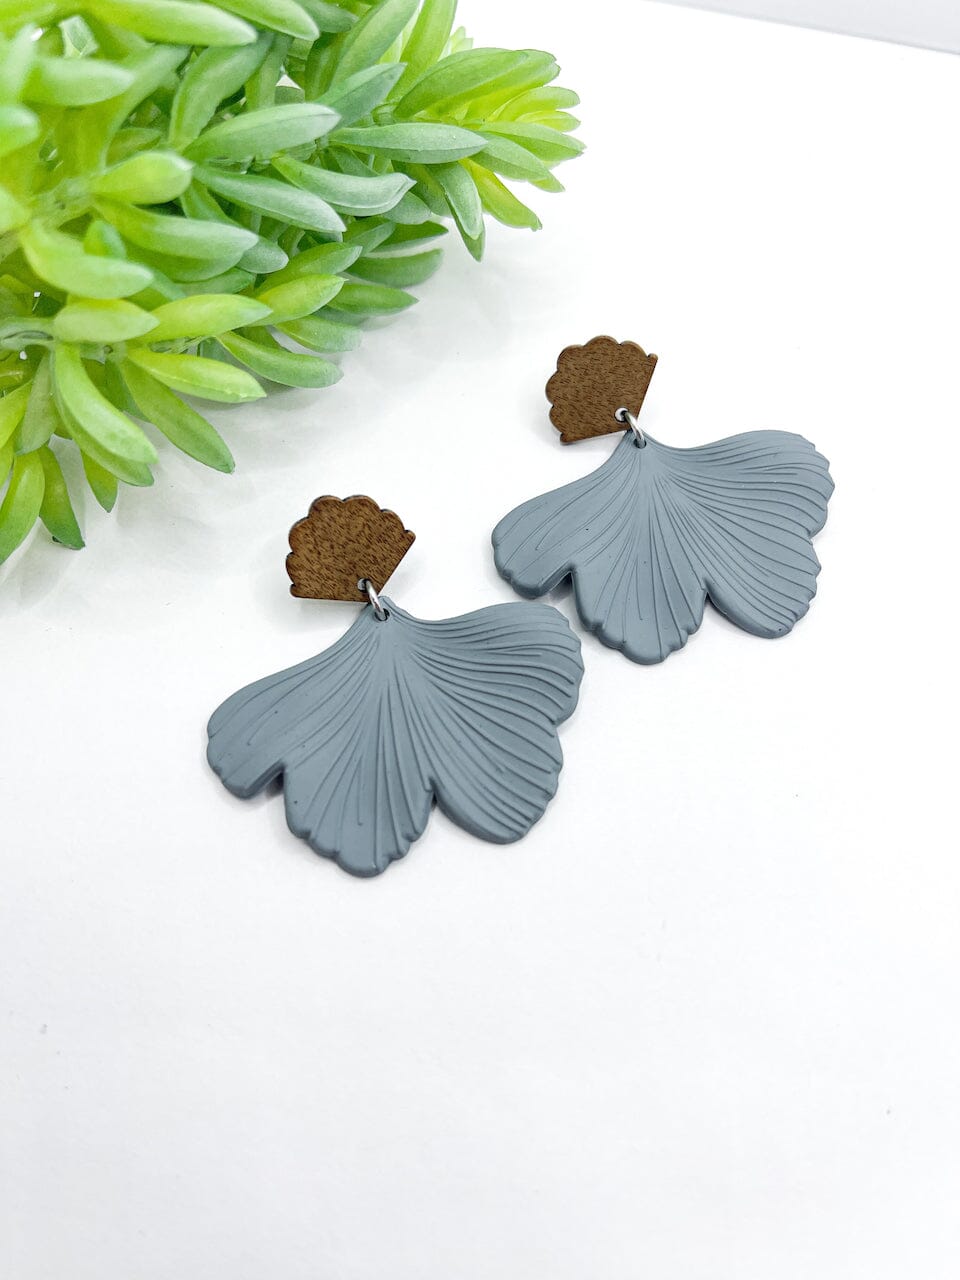 Petal Blooms | 2 Colors | Leather and Resin Earrings | Stacked | Hypoallergenic | Women Leather Earrings Create Hope Cuffs 